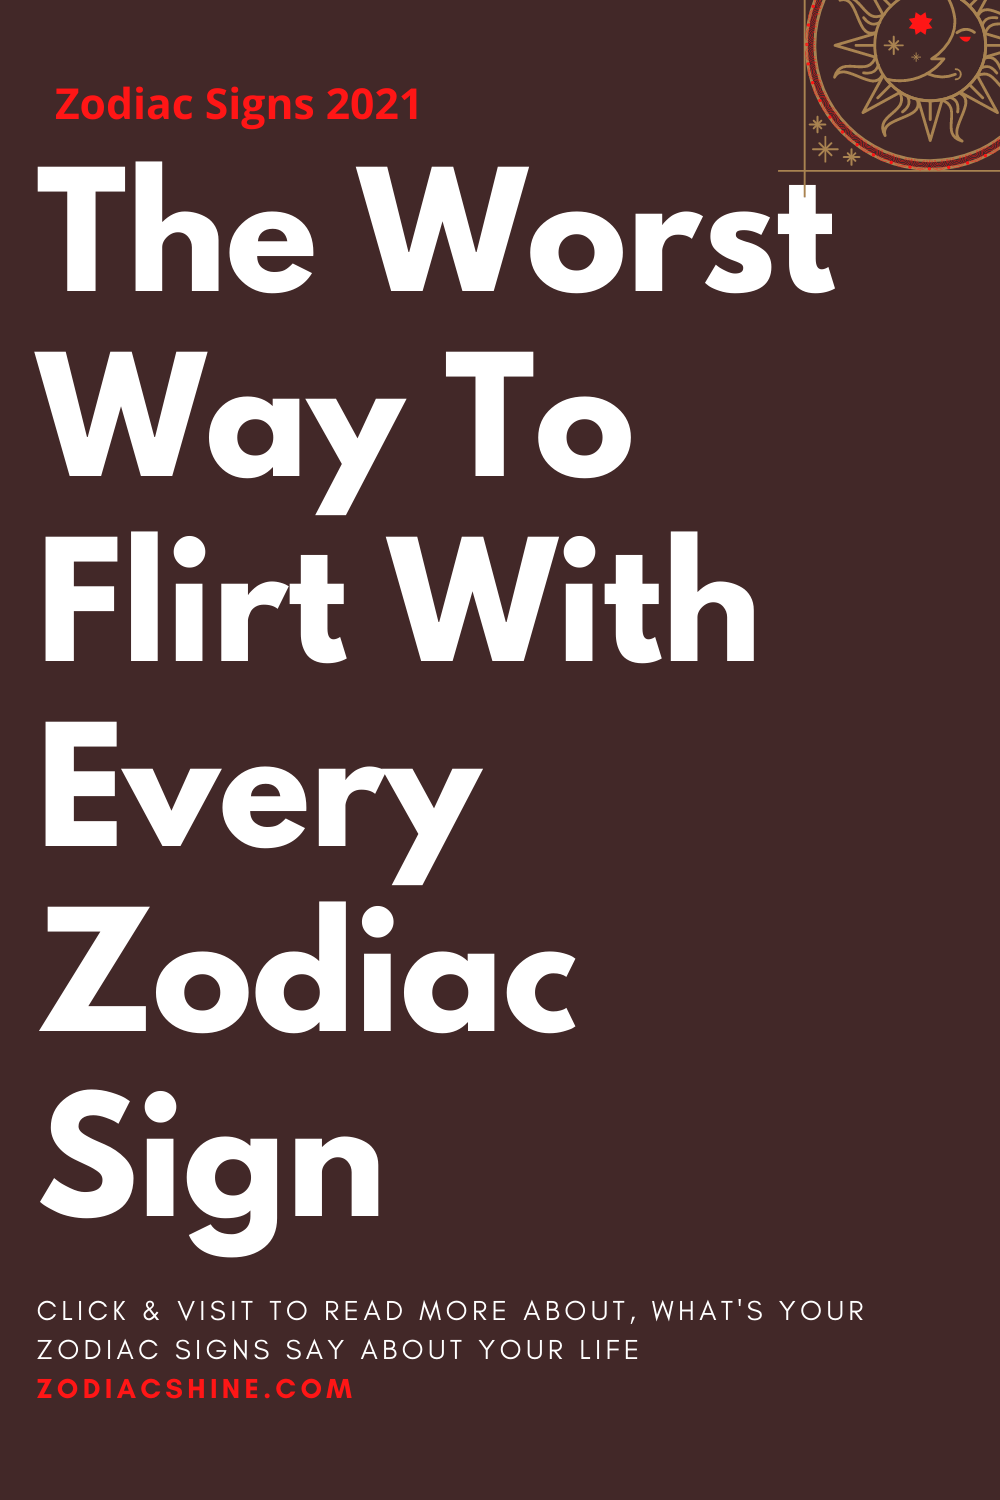 The Worst Way To Flirt With Every Zodiac Sign